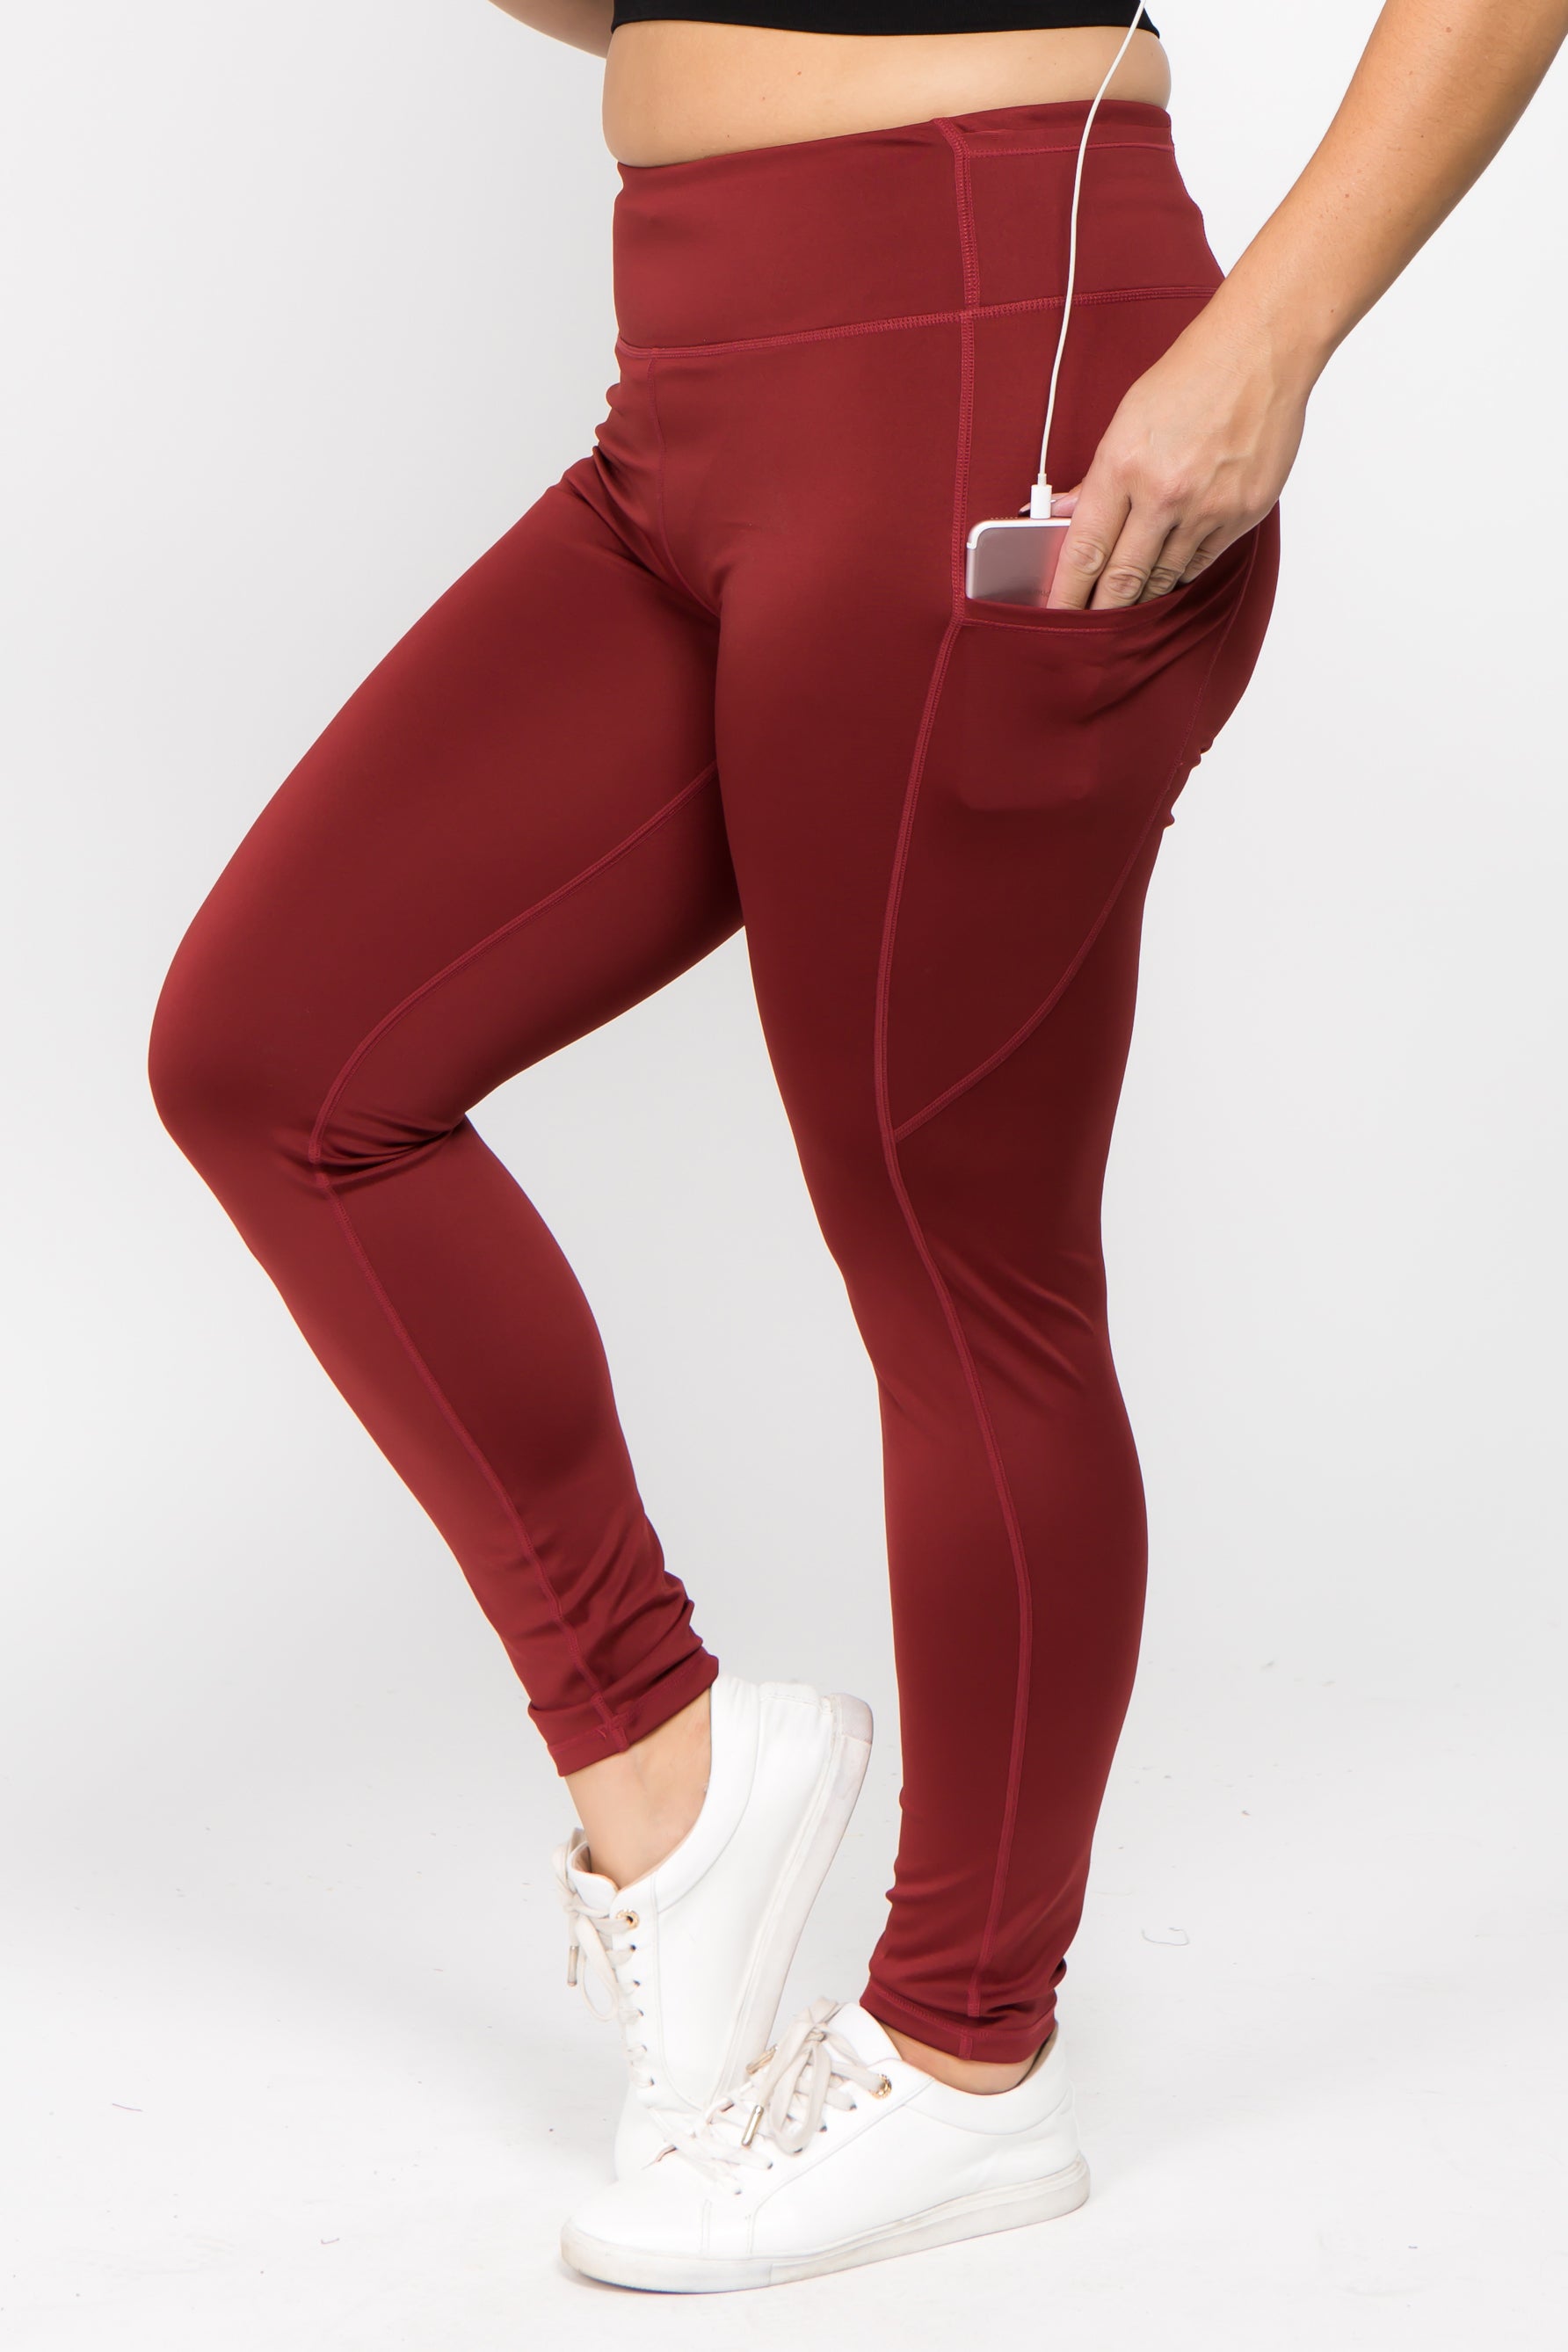 Workout Leggings With Pockets Nz Herald